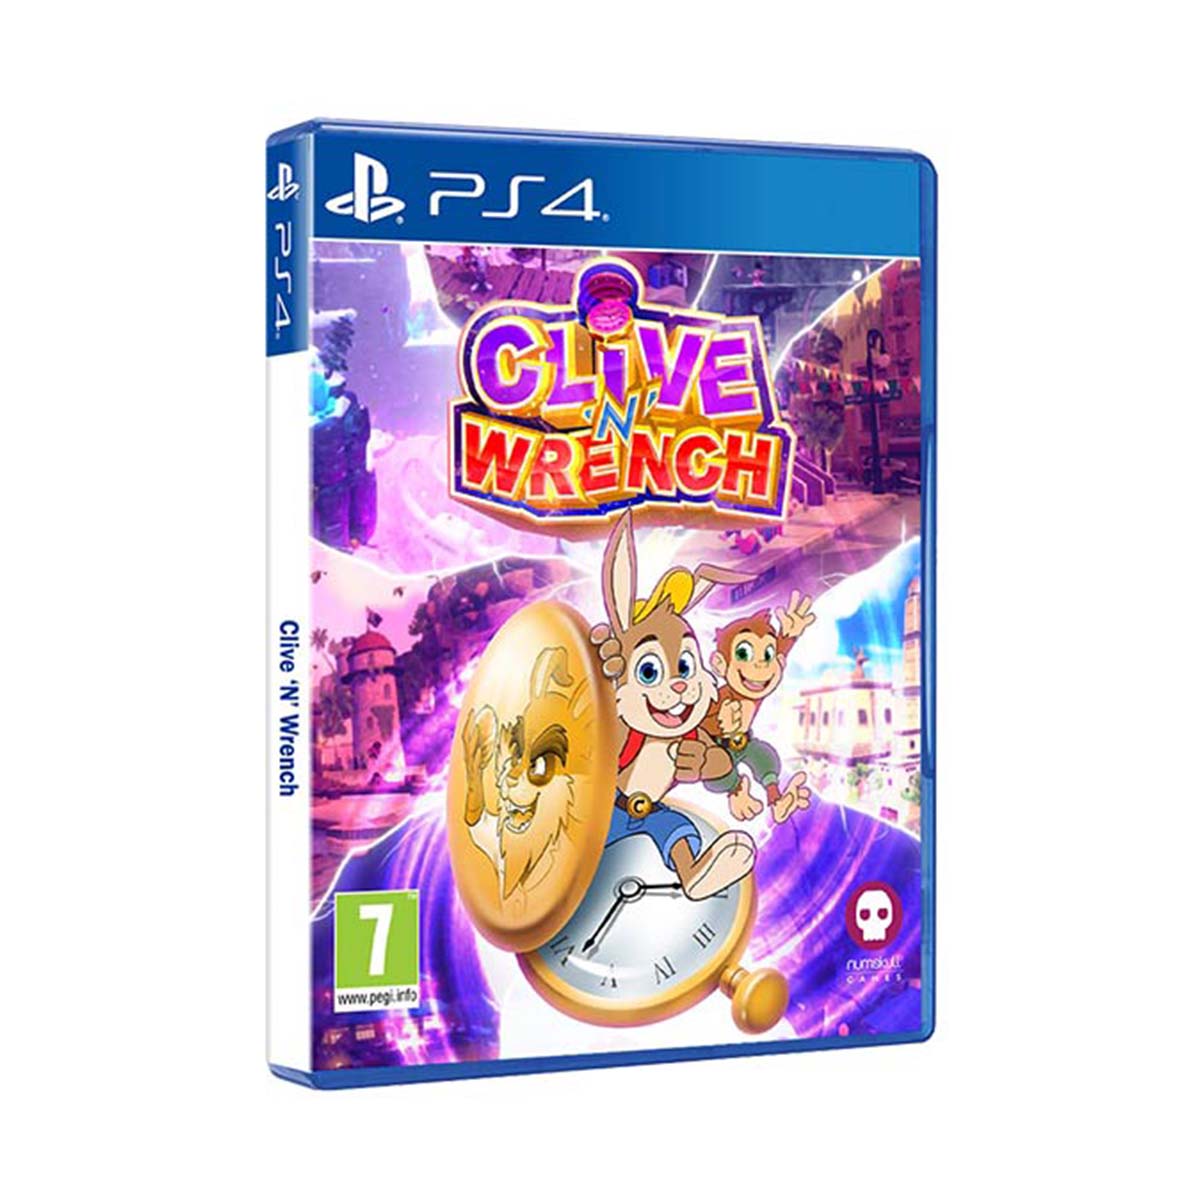 gennembore Prøve til ShopTo on Twitter: "Just Added: £30.85 Clive N Wrench #PS4 #NUMSKULL  #CliveNWrench #PlayStationPlus #PlayStationStore #PlayStation  #PSPlusPremium #PSPlus #VideoGames: Standard EditionClive 'N' Wrench is a  3D platformer starring Clive, a rabbit, and Wrench,